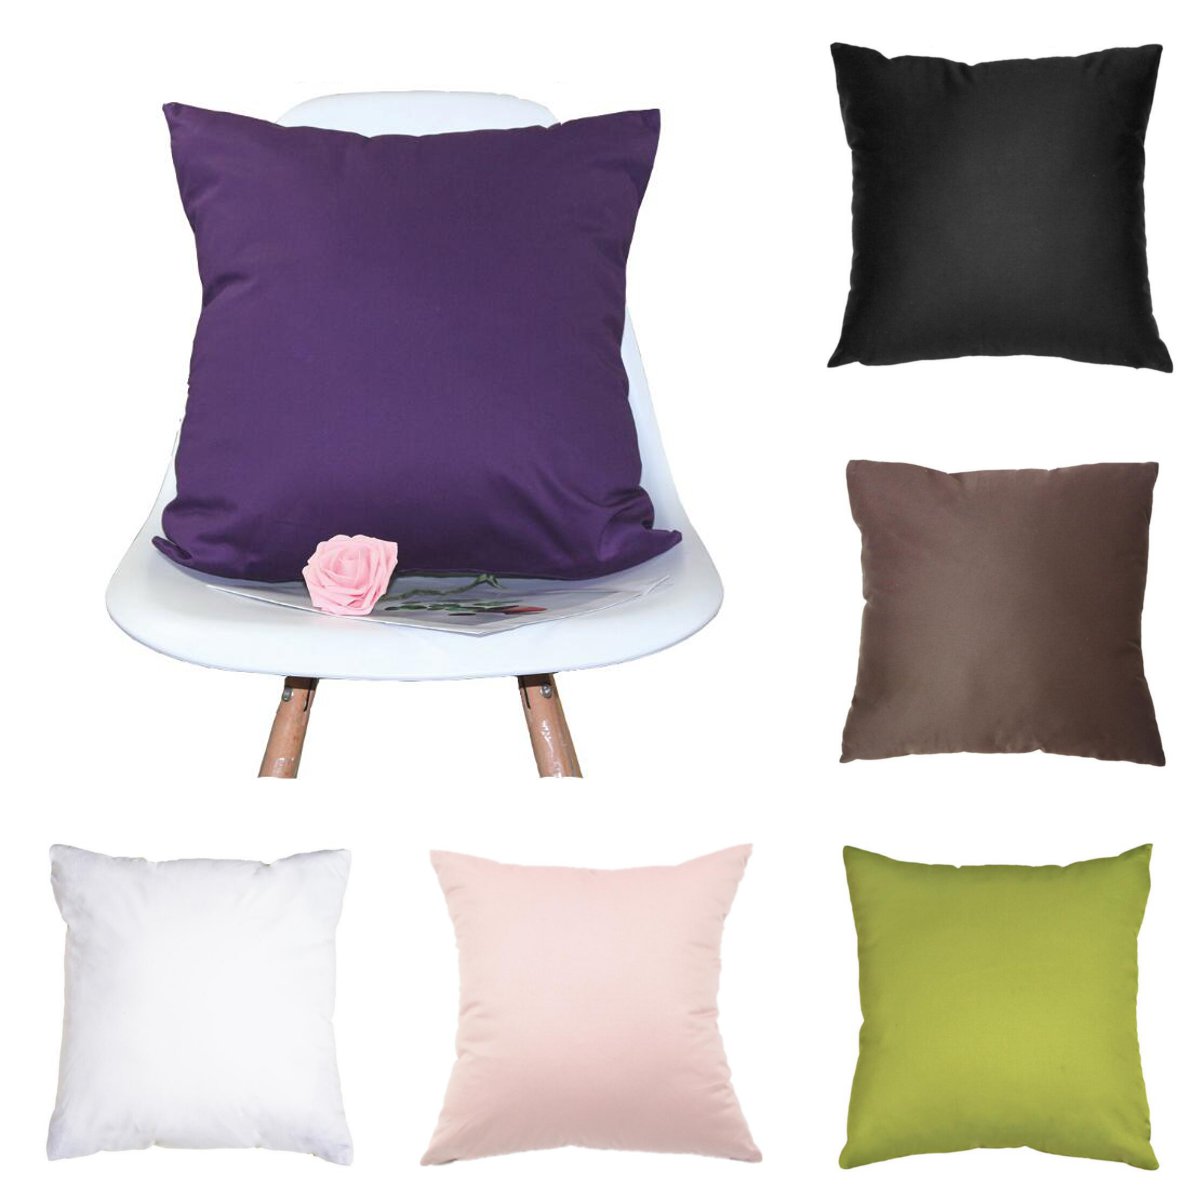 Cotton-Pillow-Case-Solid-Color-Cushion-Cover-Throw-Home-Sofa-Decoration-45X45cm-1579144-1